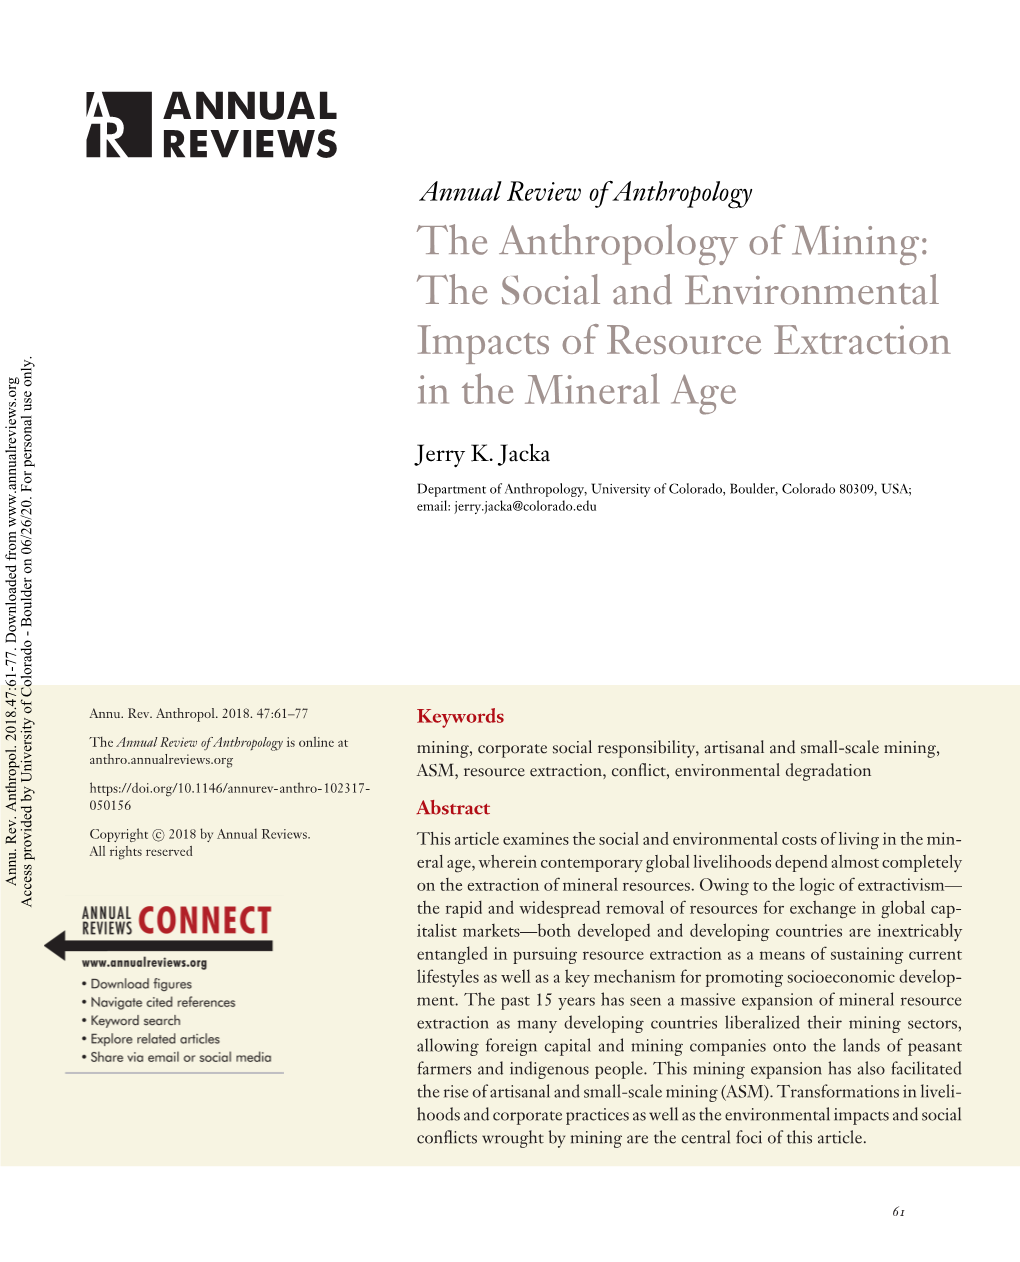 The Anthropology of Mining: the Social and Environmental Impacts of Resource Extraction in the Mineral Age